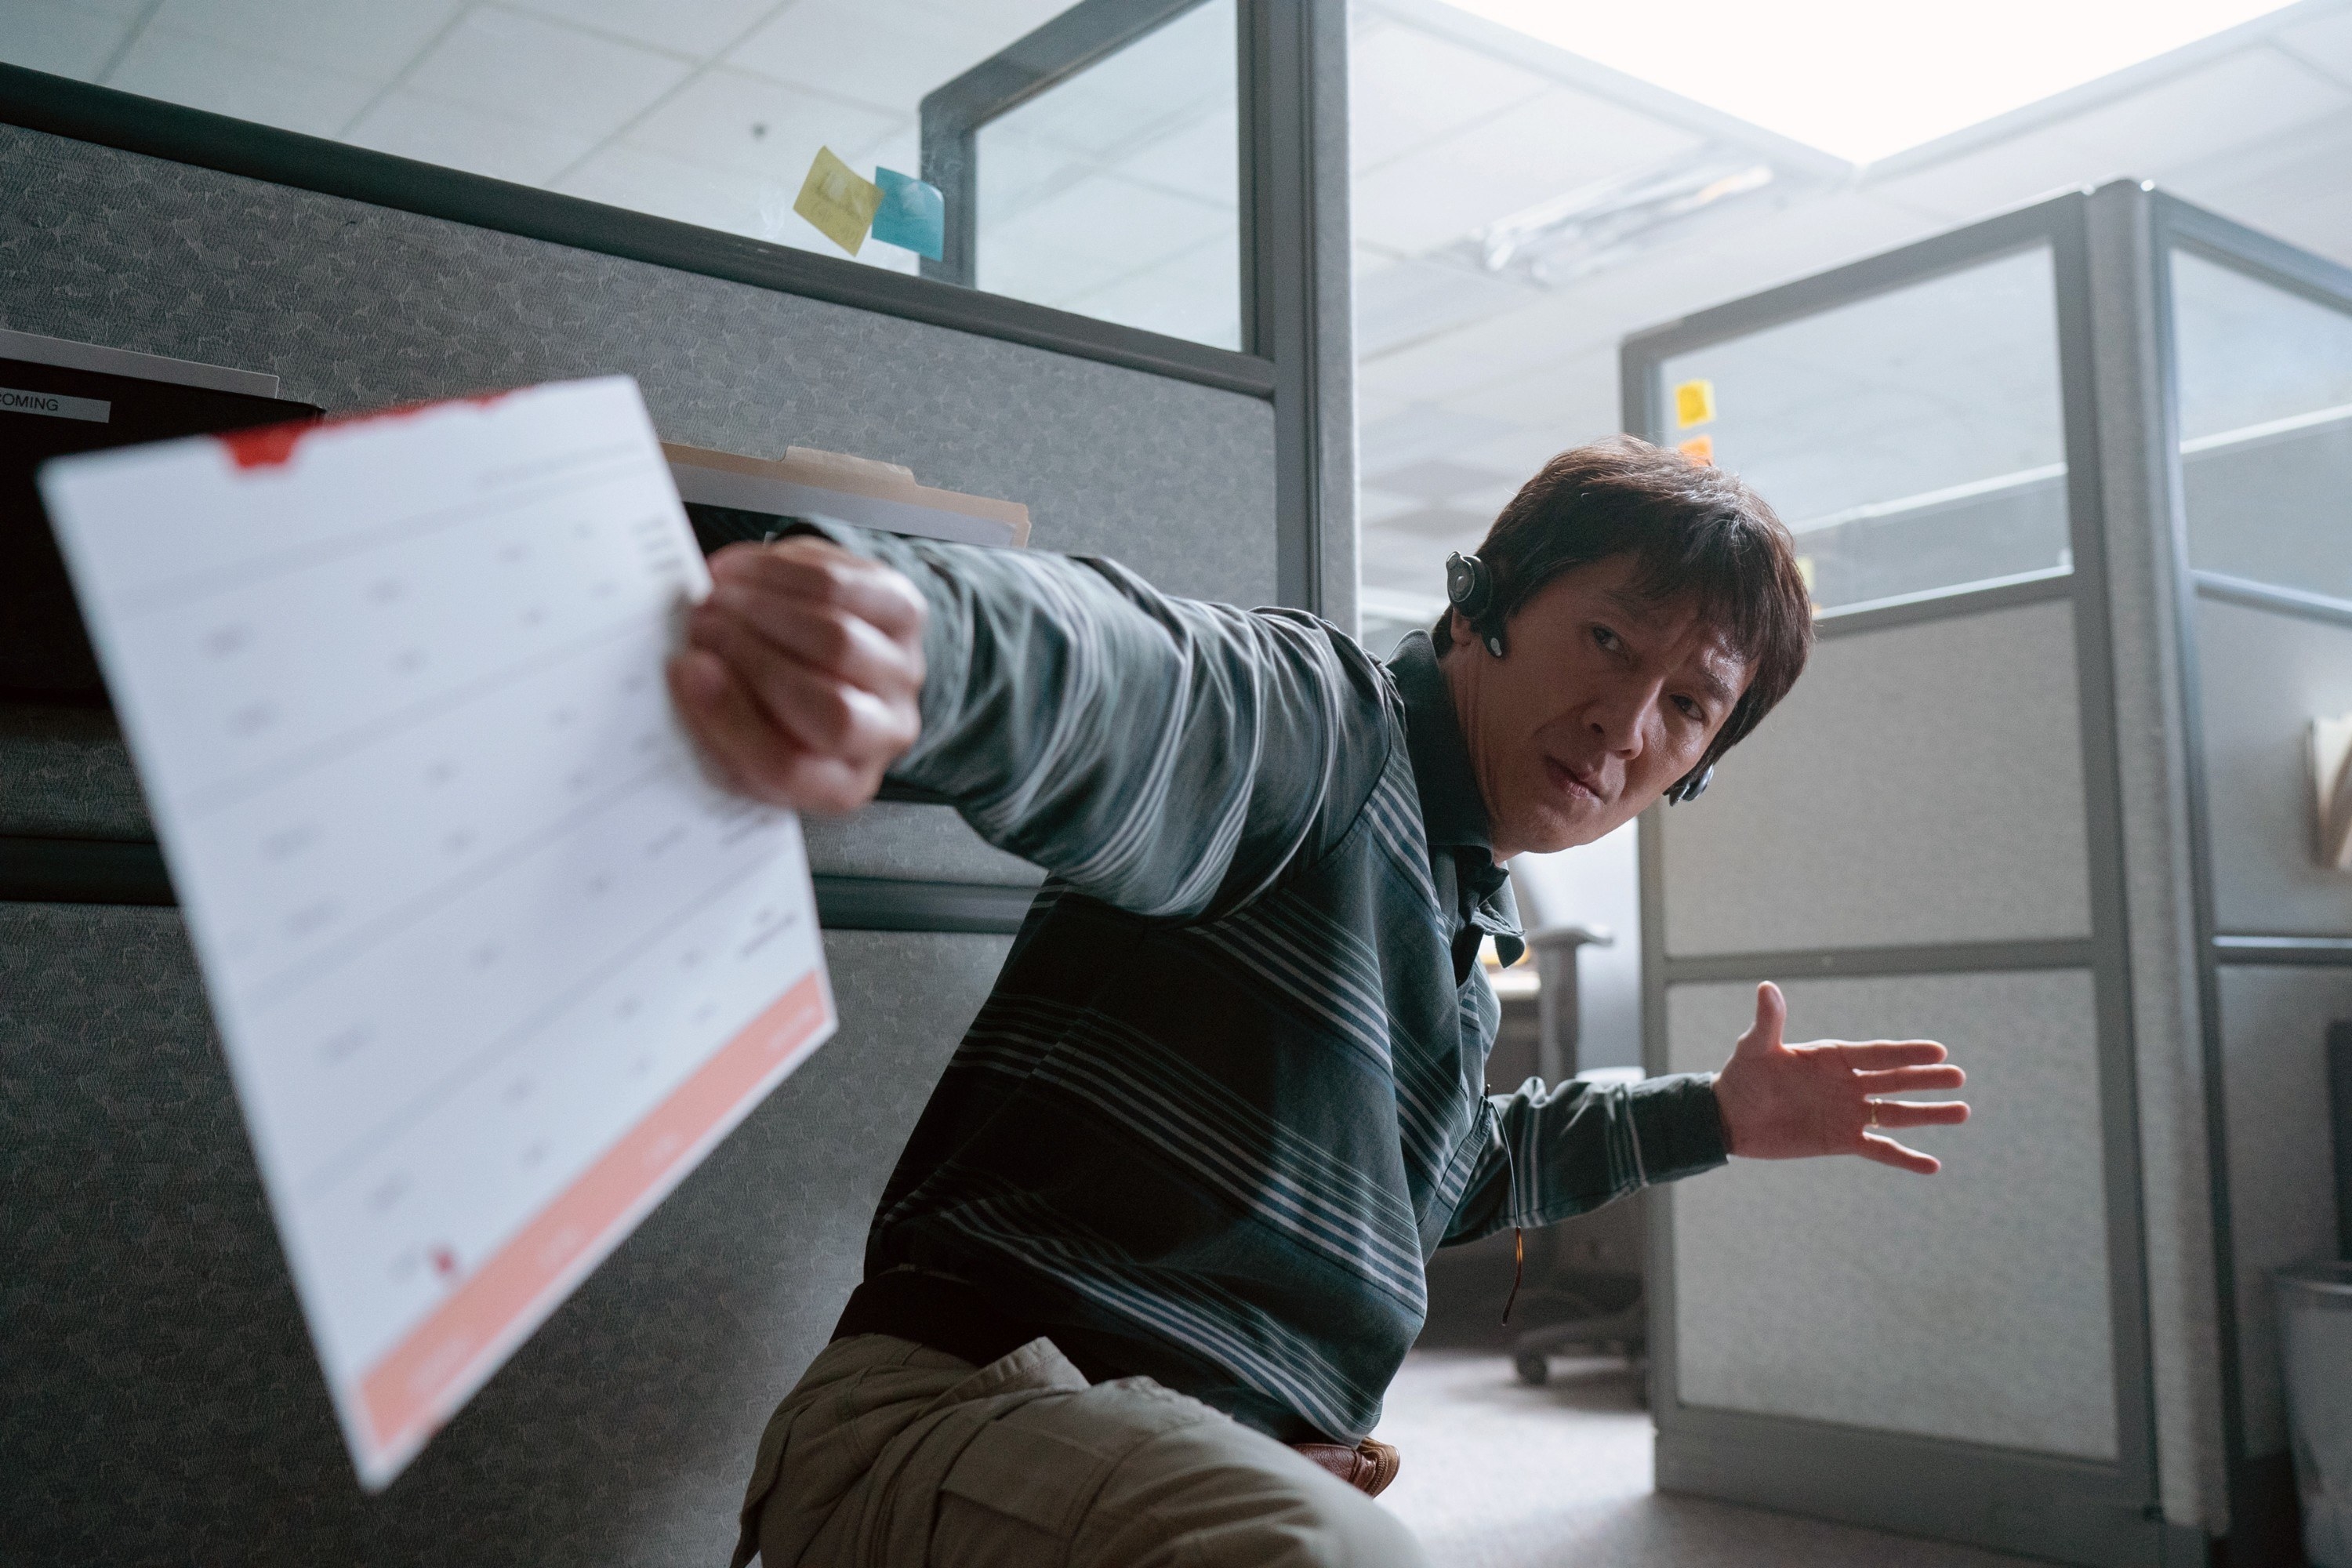 Quan holding up a wall calendar in an office cubicle